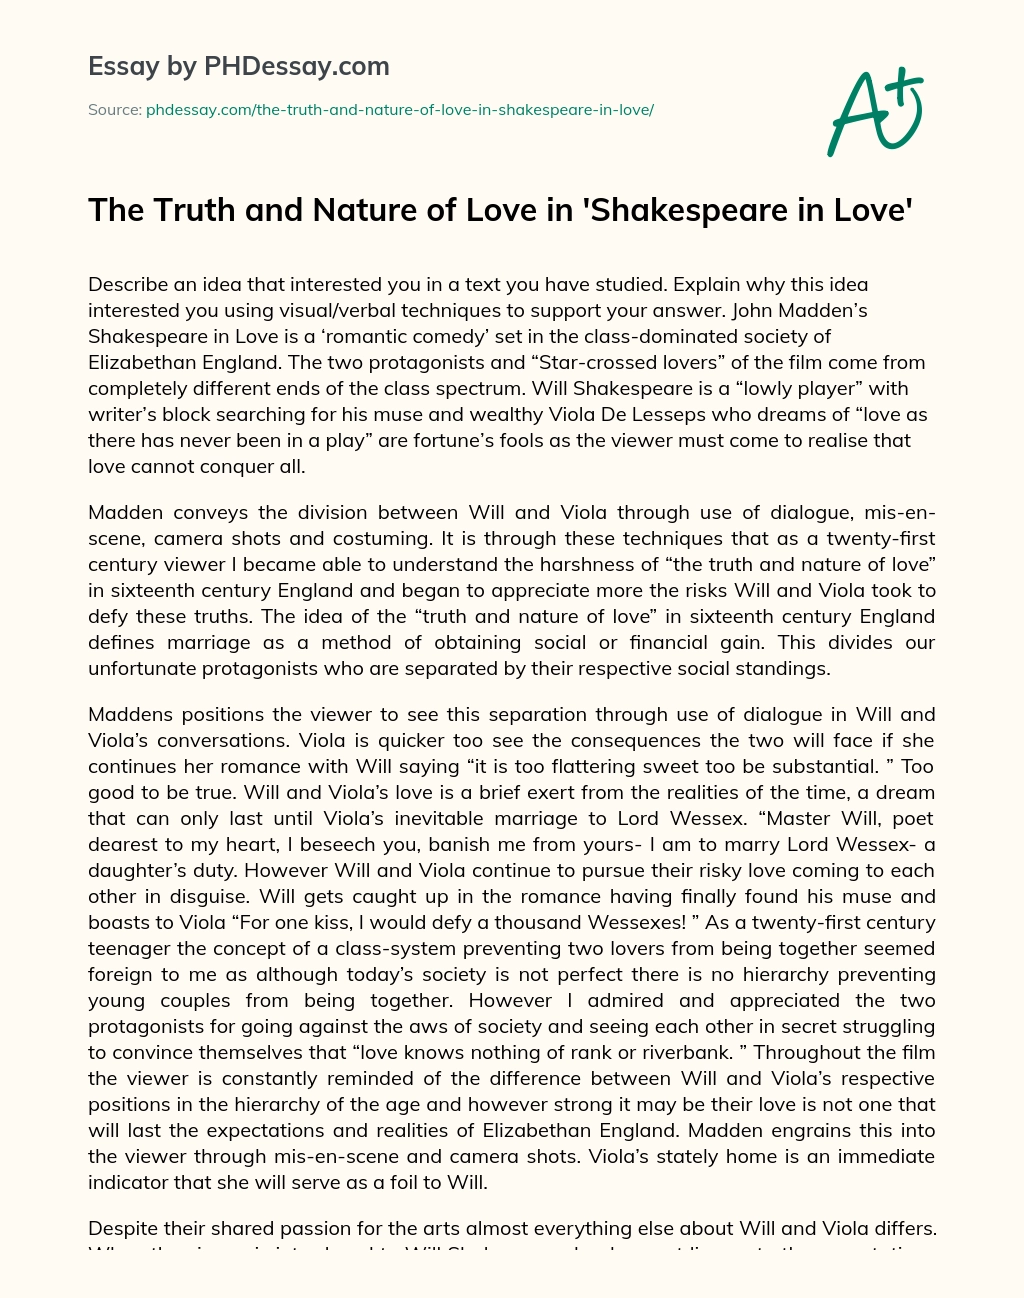 The Truth and Nature of Love in ‘Shakespeare in Love’ essay